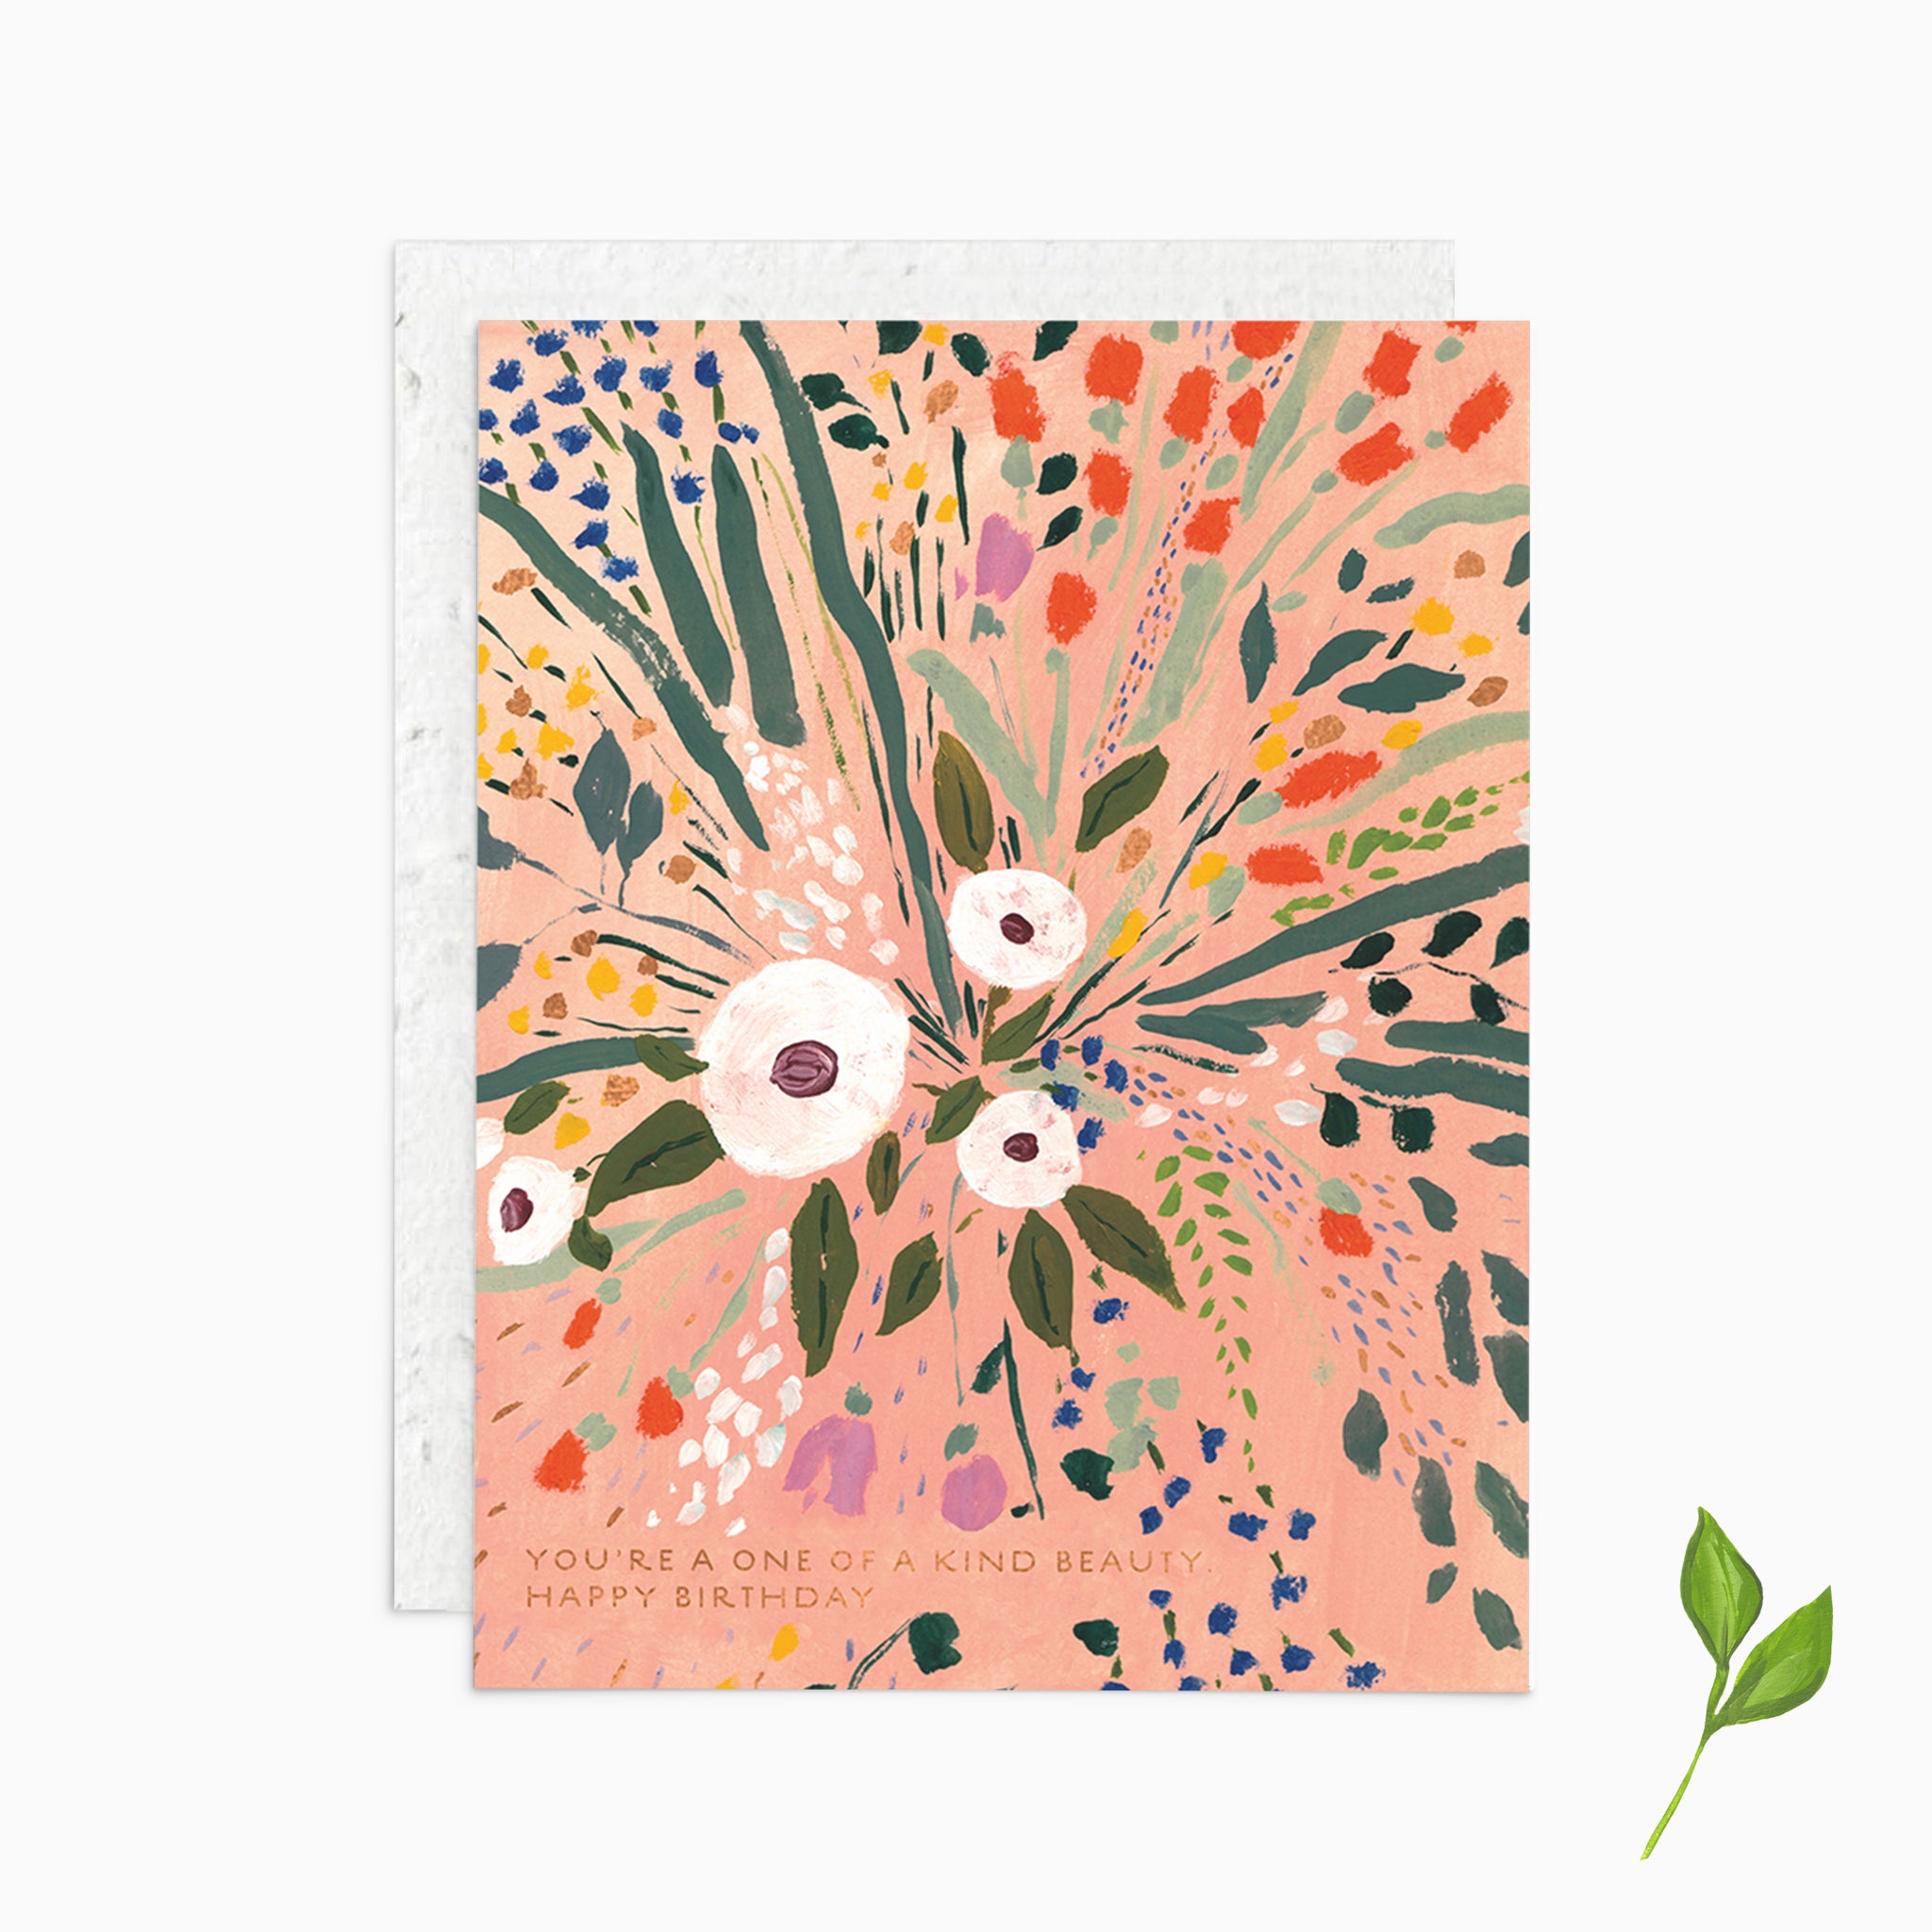 You're a One of a Kind Beauty, Happy Birthday - Plantable Card